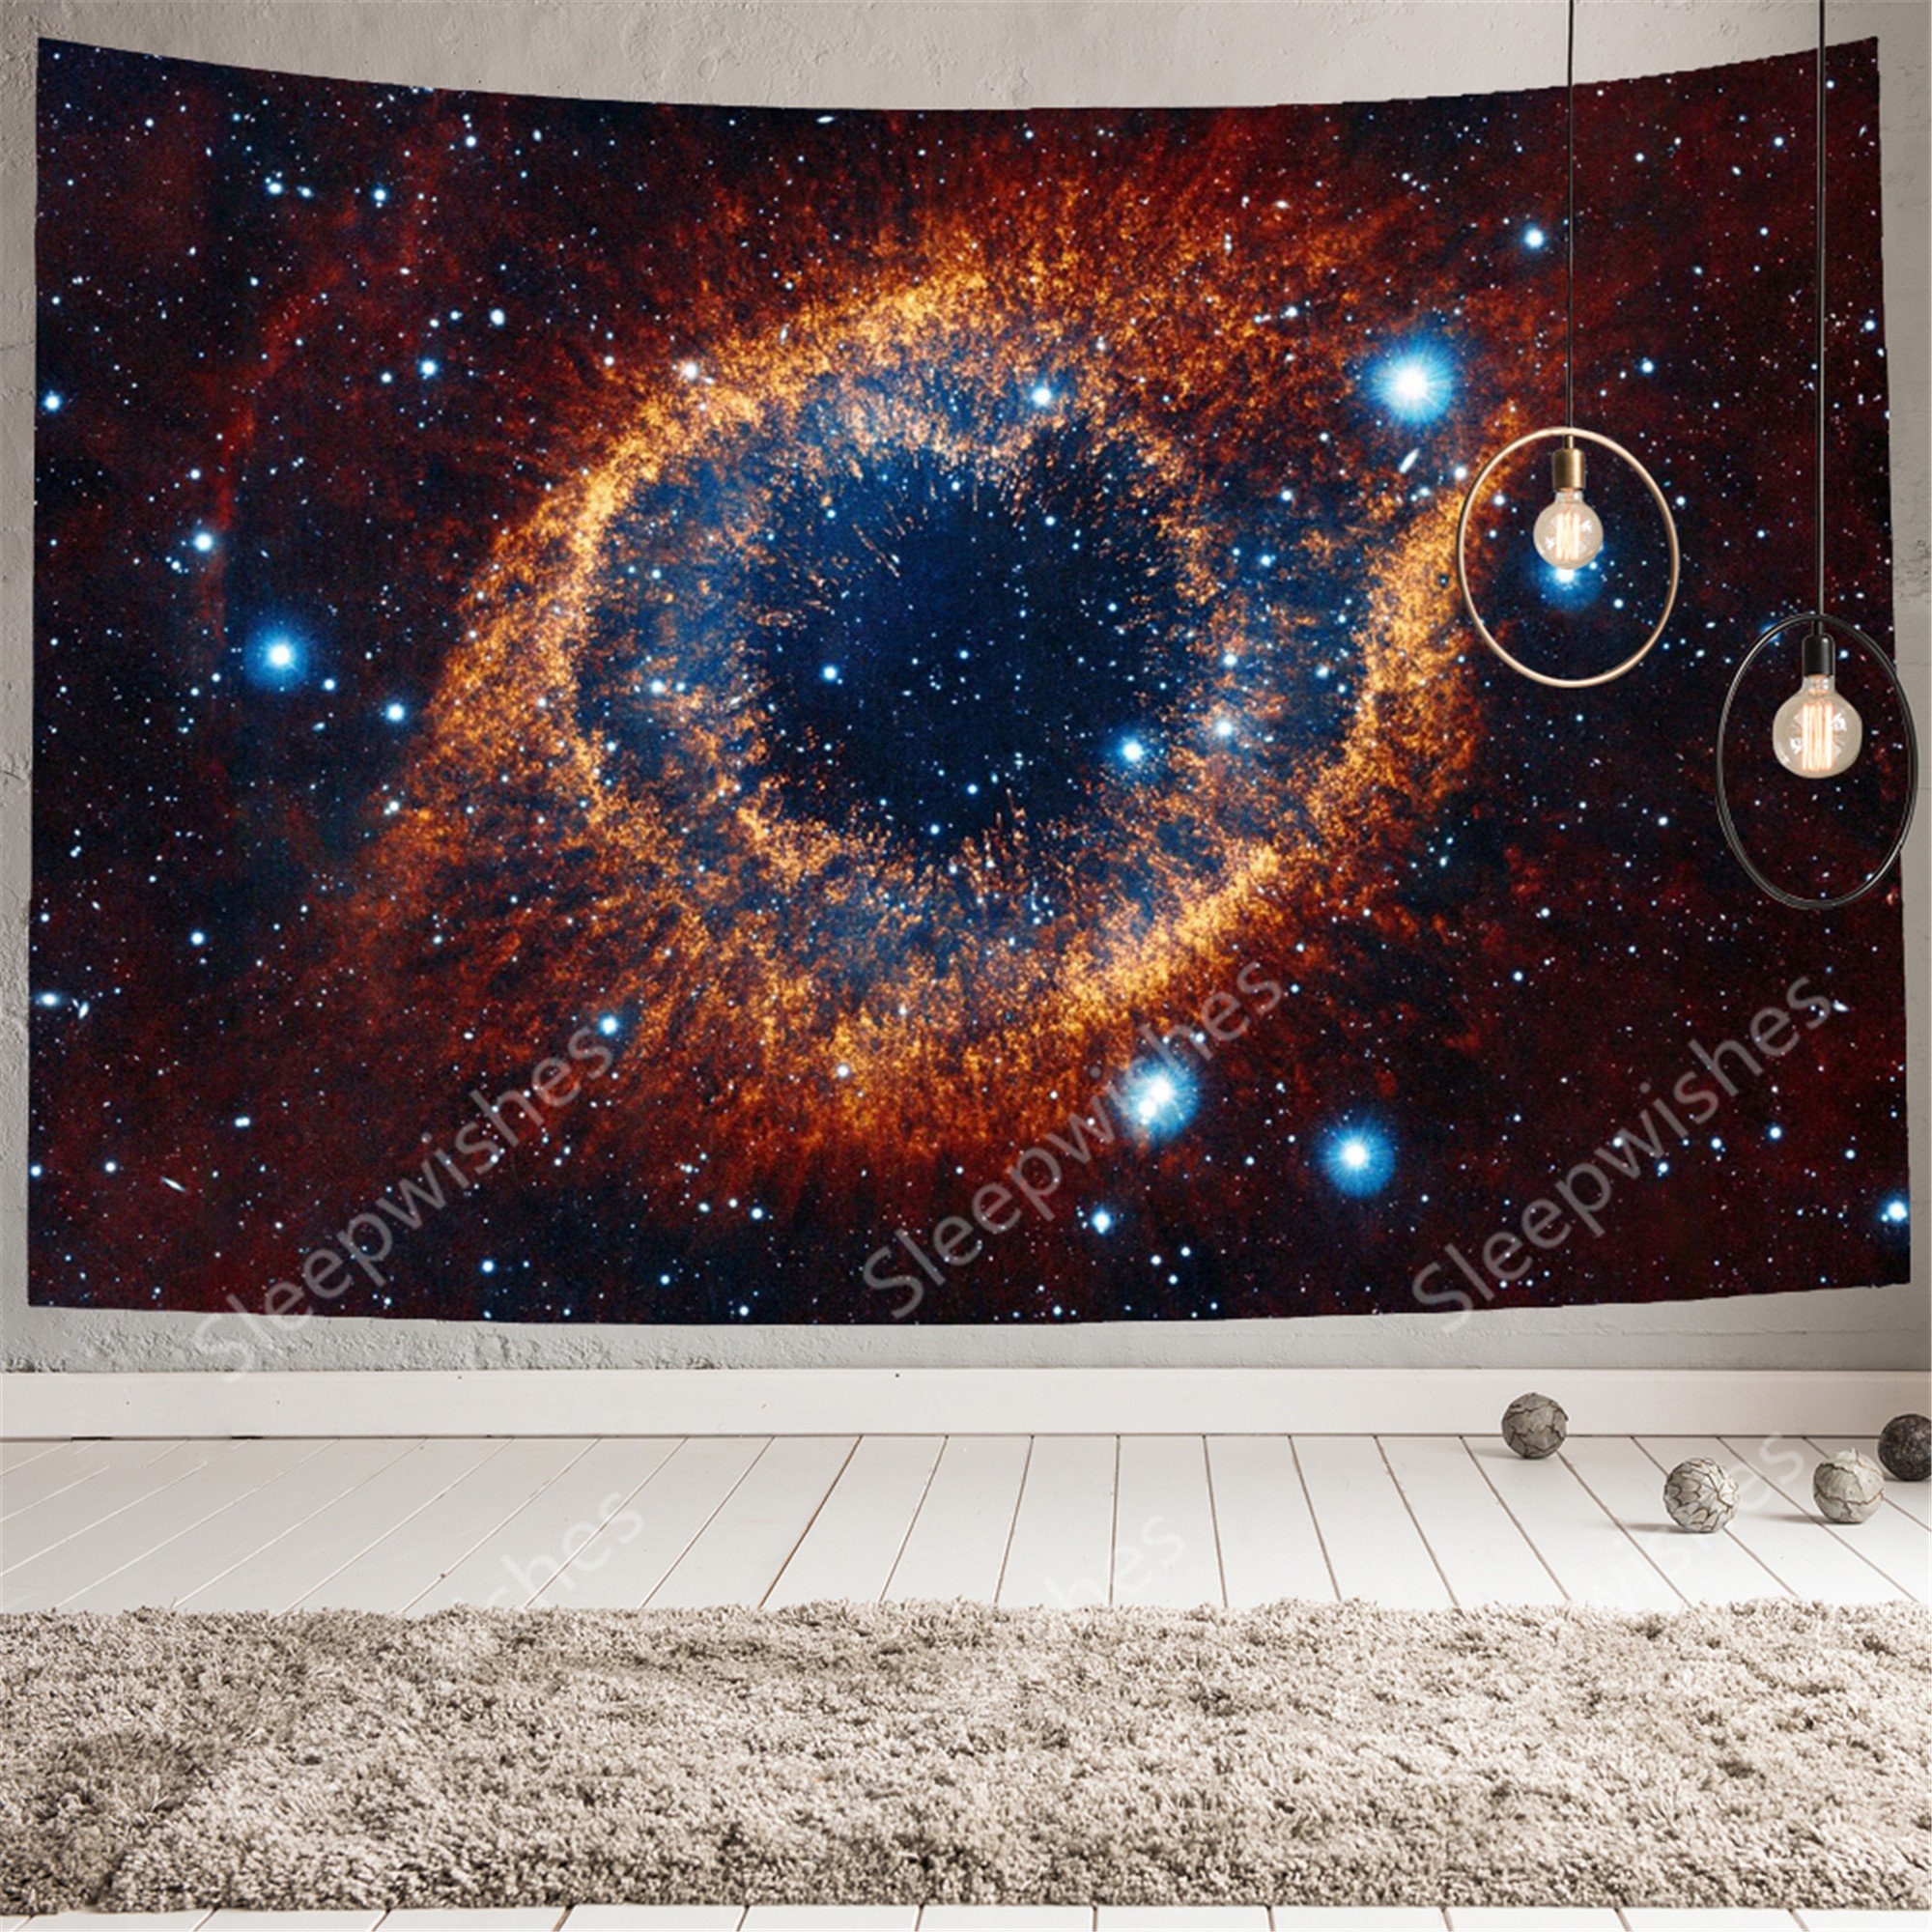 80L X 60W Inches Wall Hanging for Bedroom Living Room Dorm Navy and Purple Space Decor Tapestry Large Size Galaxy Stars in Space Celestial Astronomic Planets in the Universe Milky Way Print